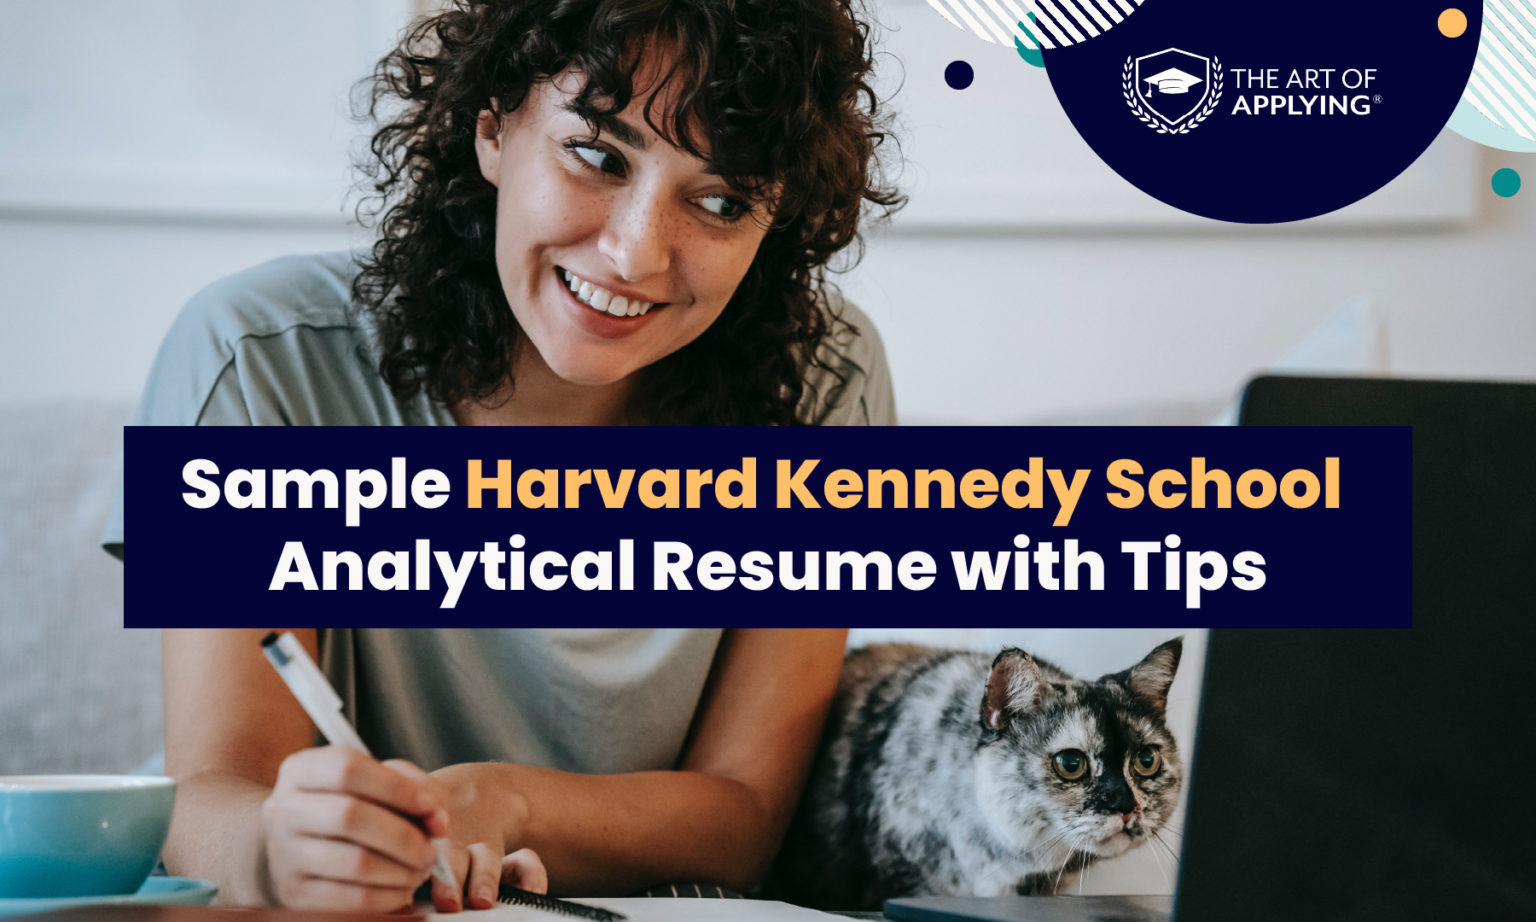 Young woman smiling and writing notes from laptop and a cat next to her, and text: Sample Harvard Kennedy School Analytical Resume with Tips